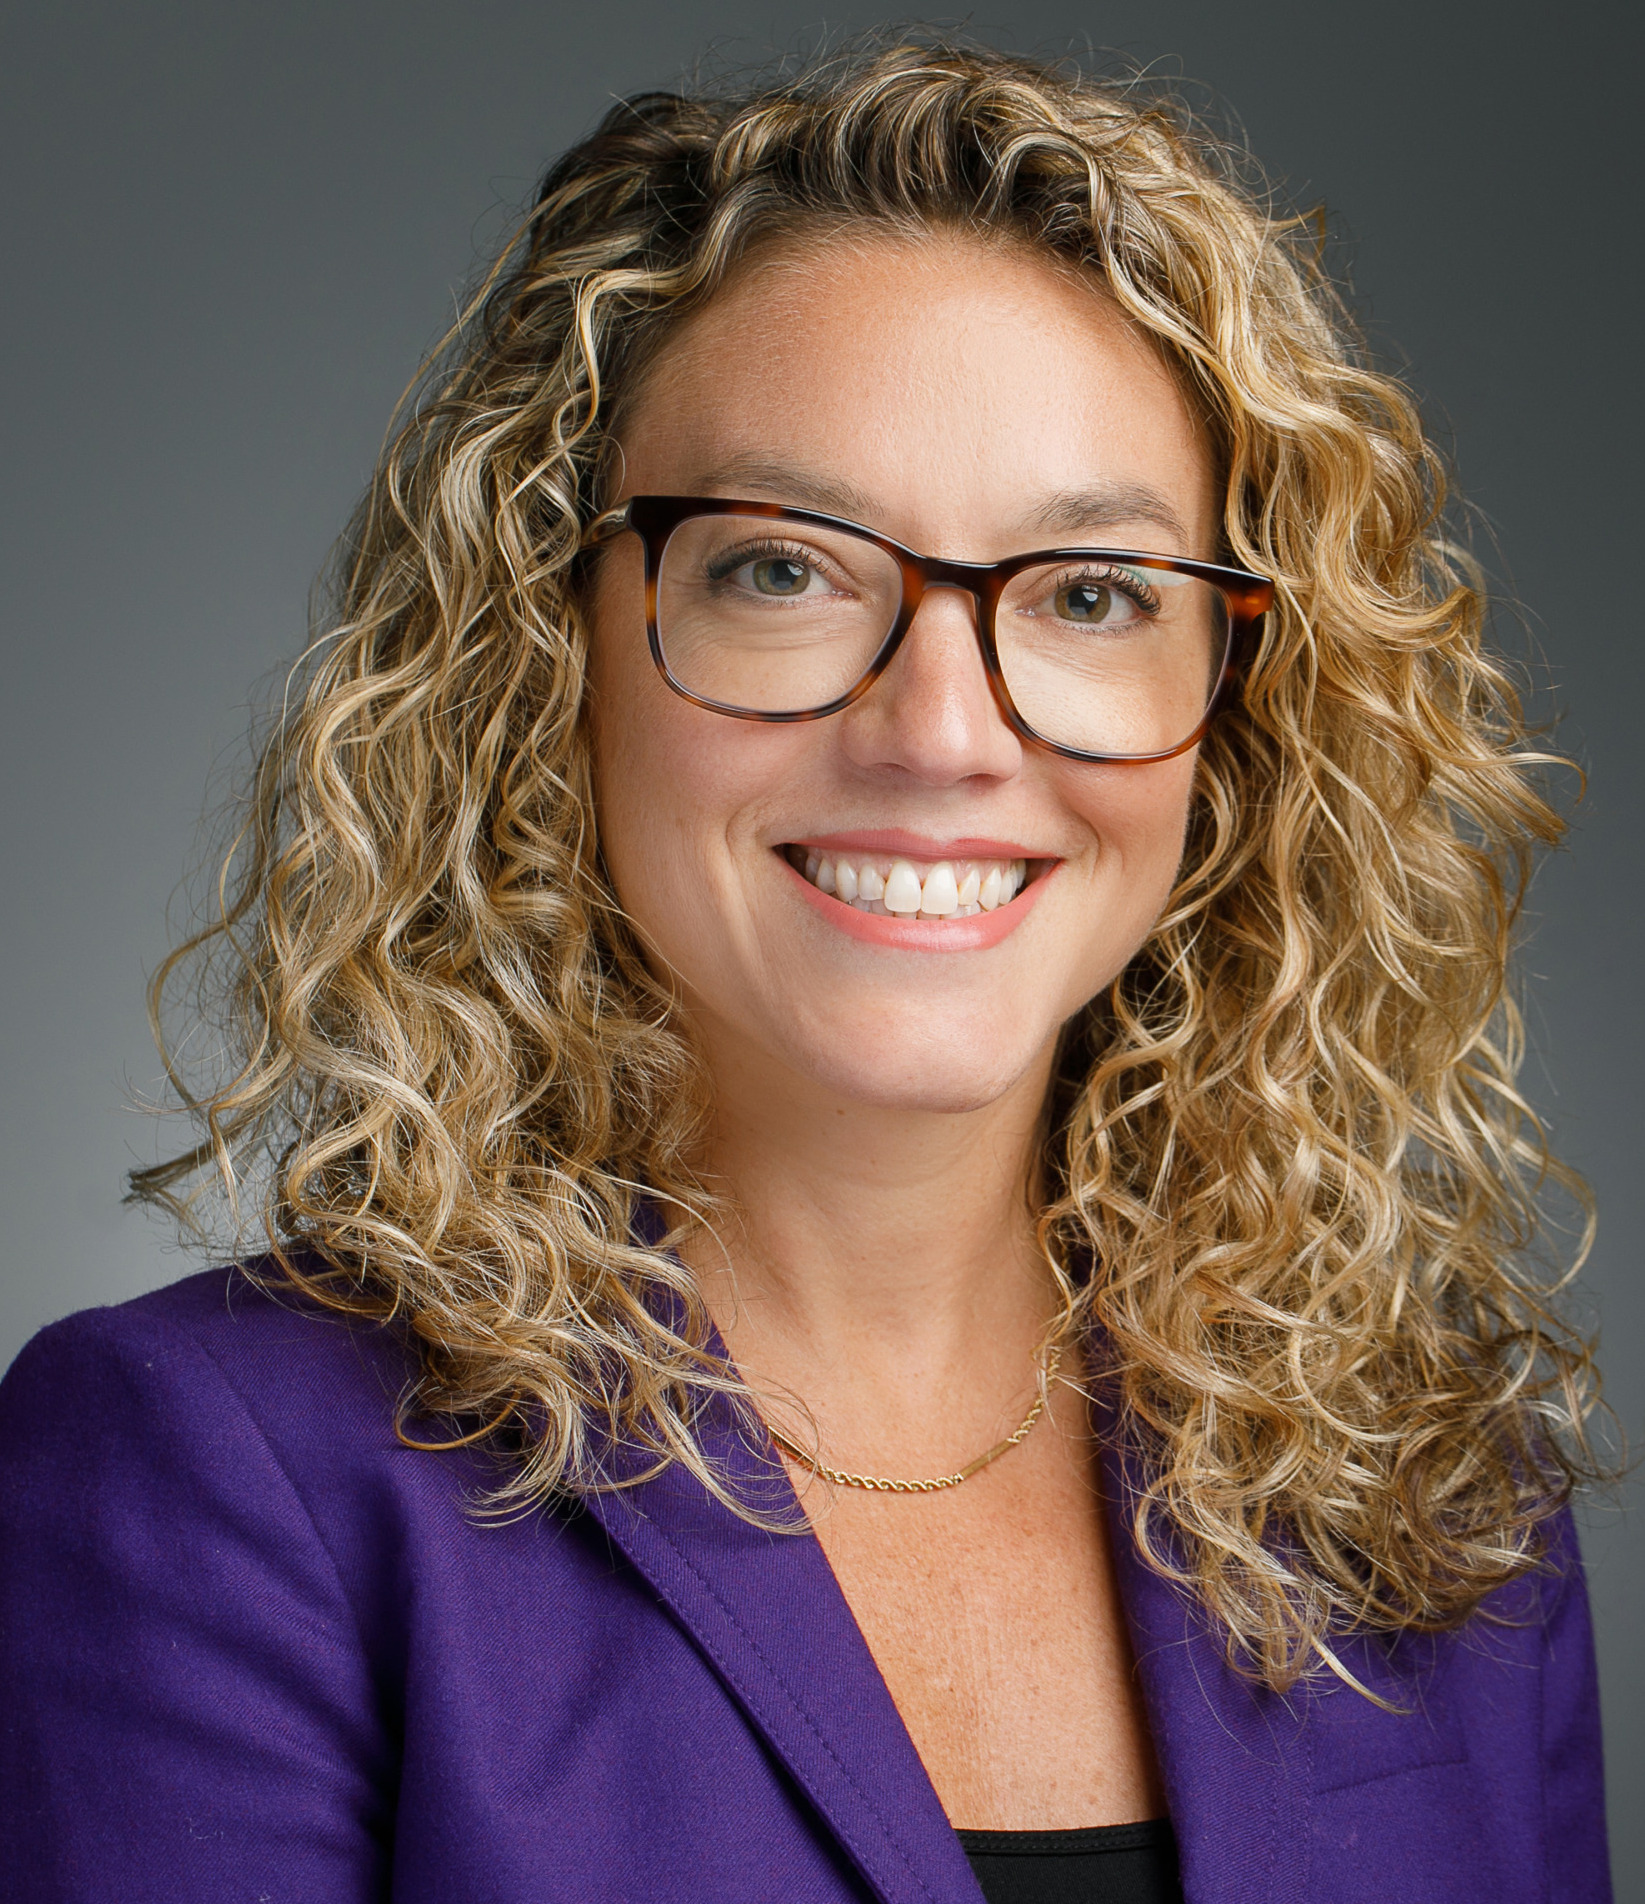 Legal counseling for behavior issues: Headshot woman with long, curly, blonde hair and dark framed glasses in purple suit with dark top against gray background